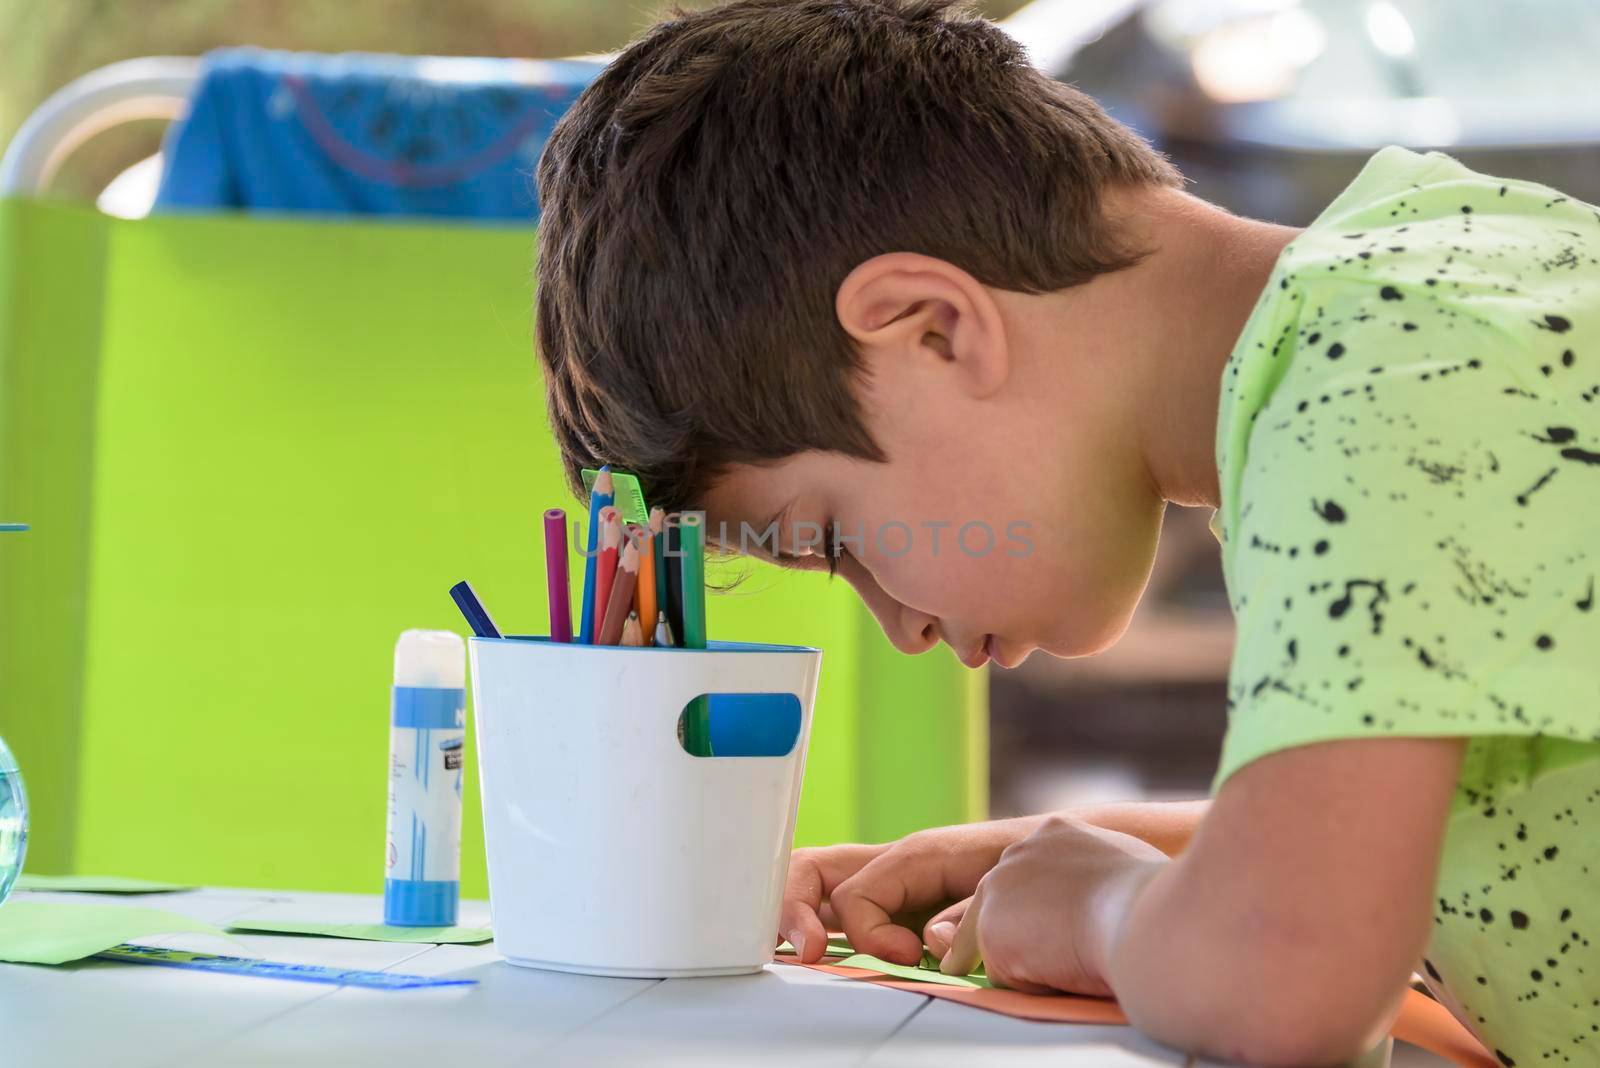 Primary school boy doing manual work while on vacation and preparing to go back to school